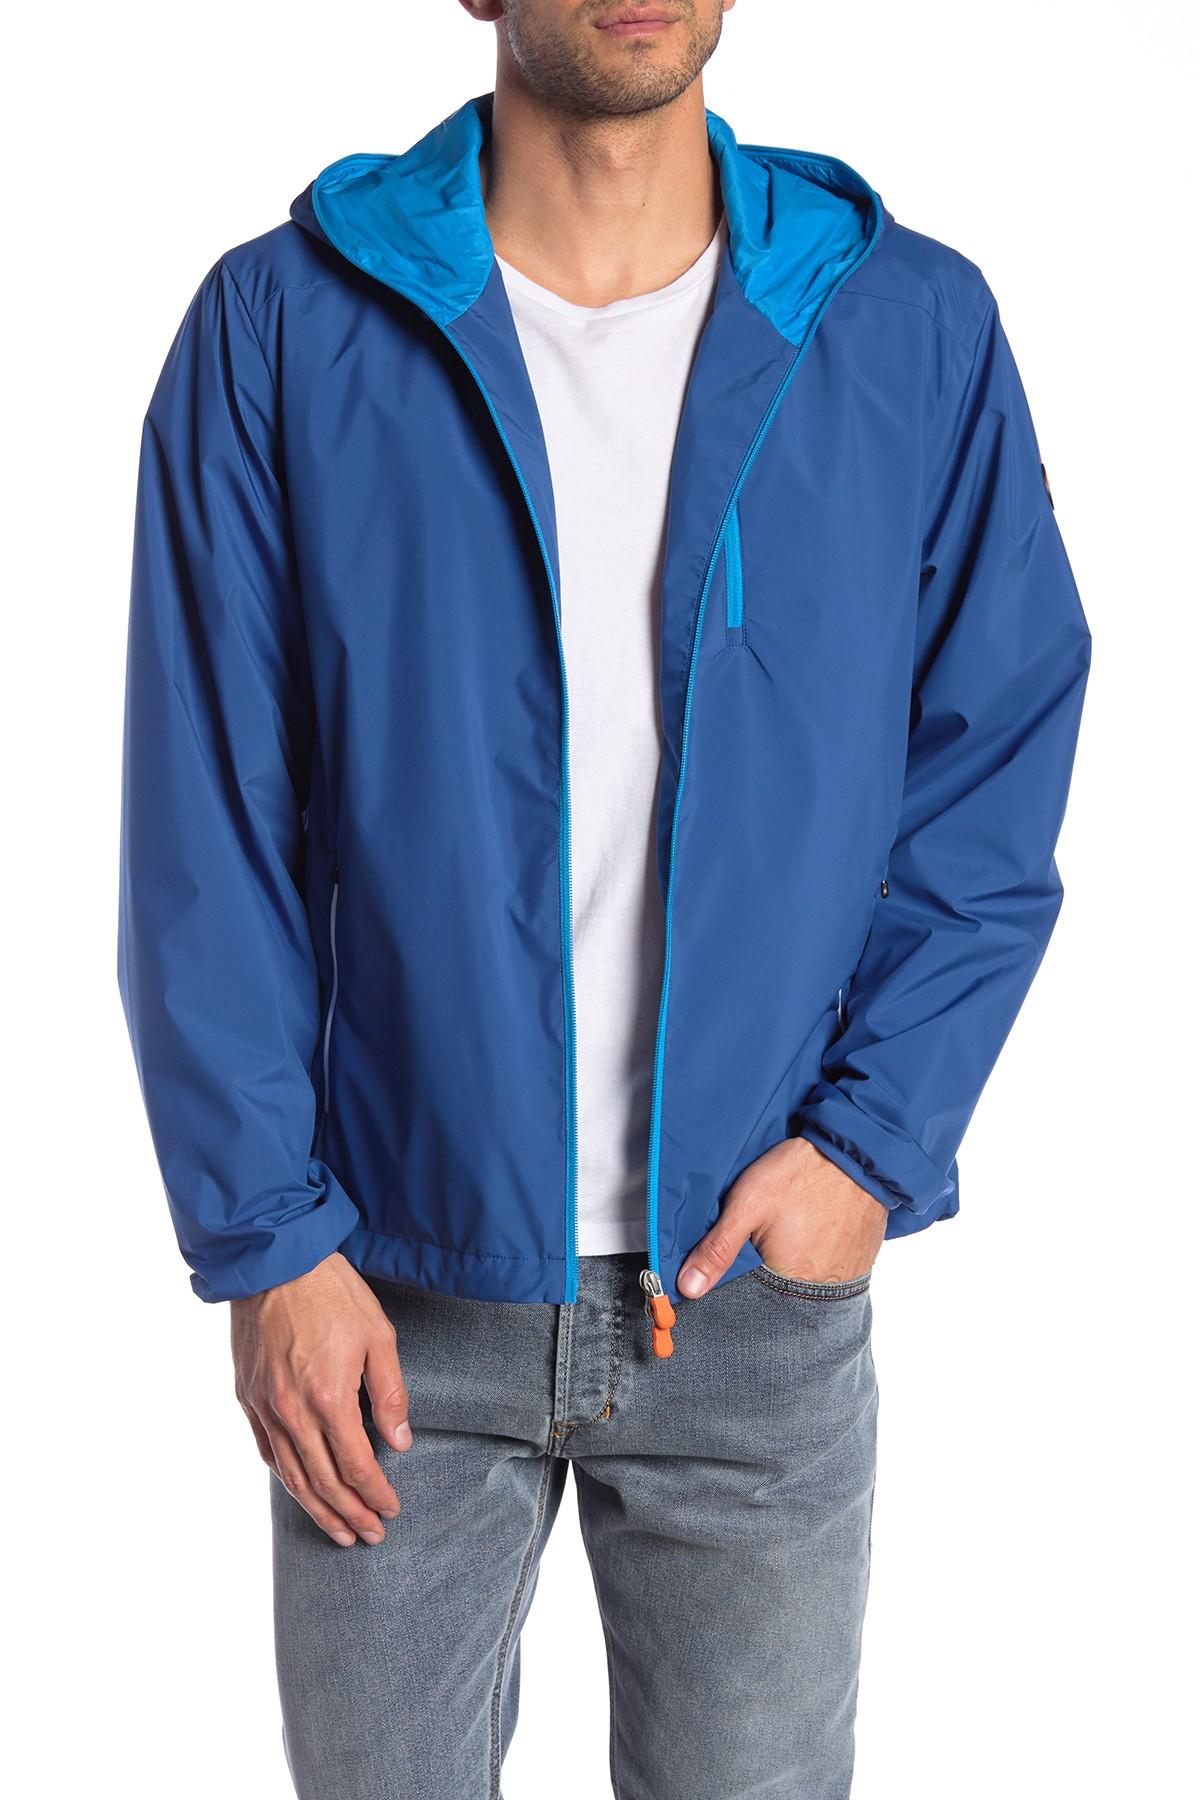 Lyst - Save The Duck Lightweight Hooded Zip Up Jacket in Blue for Men